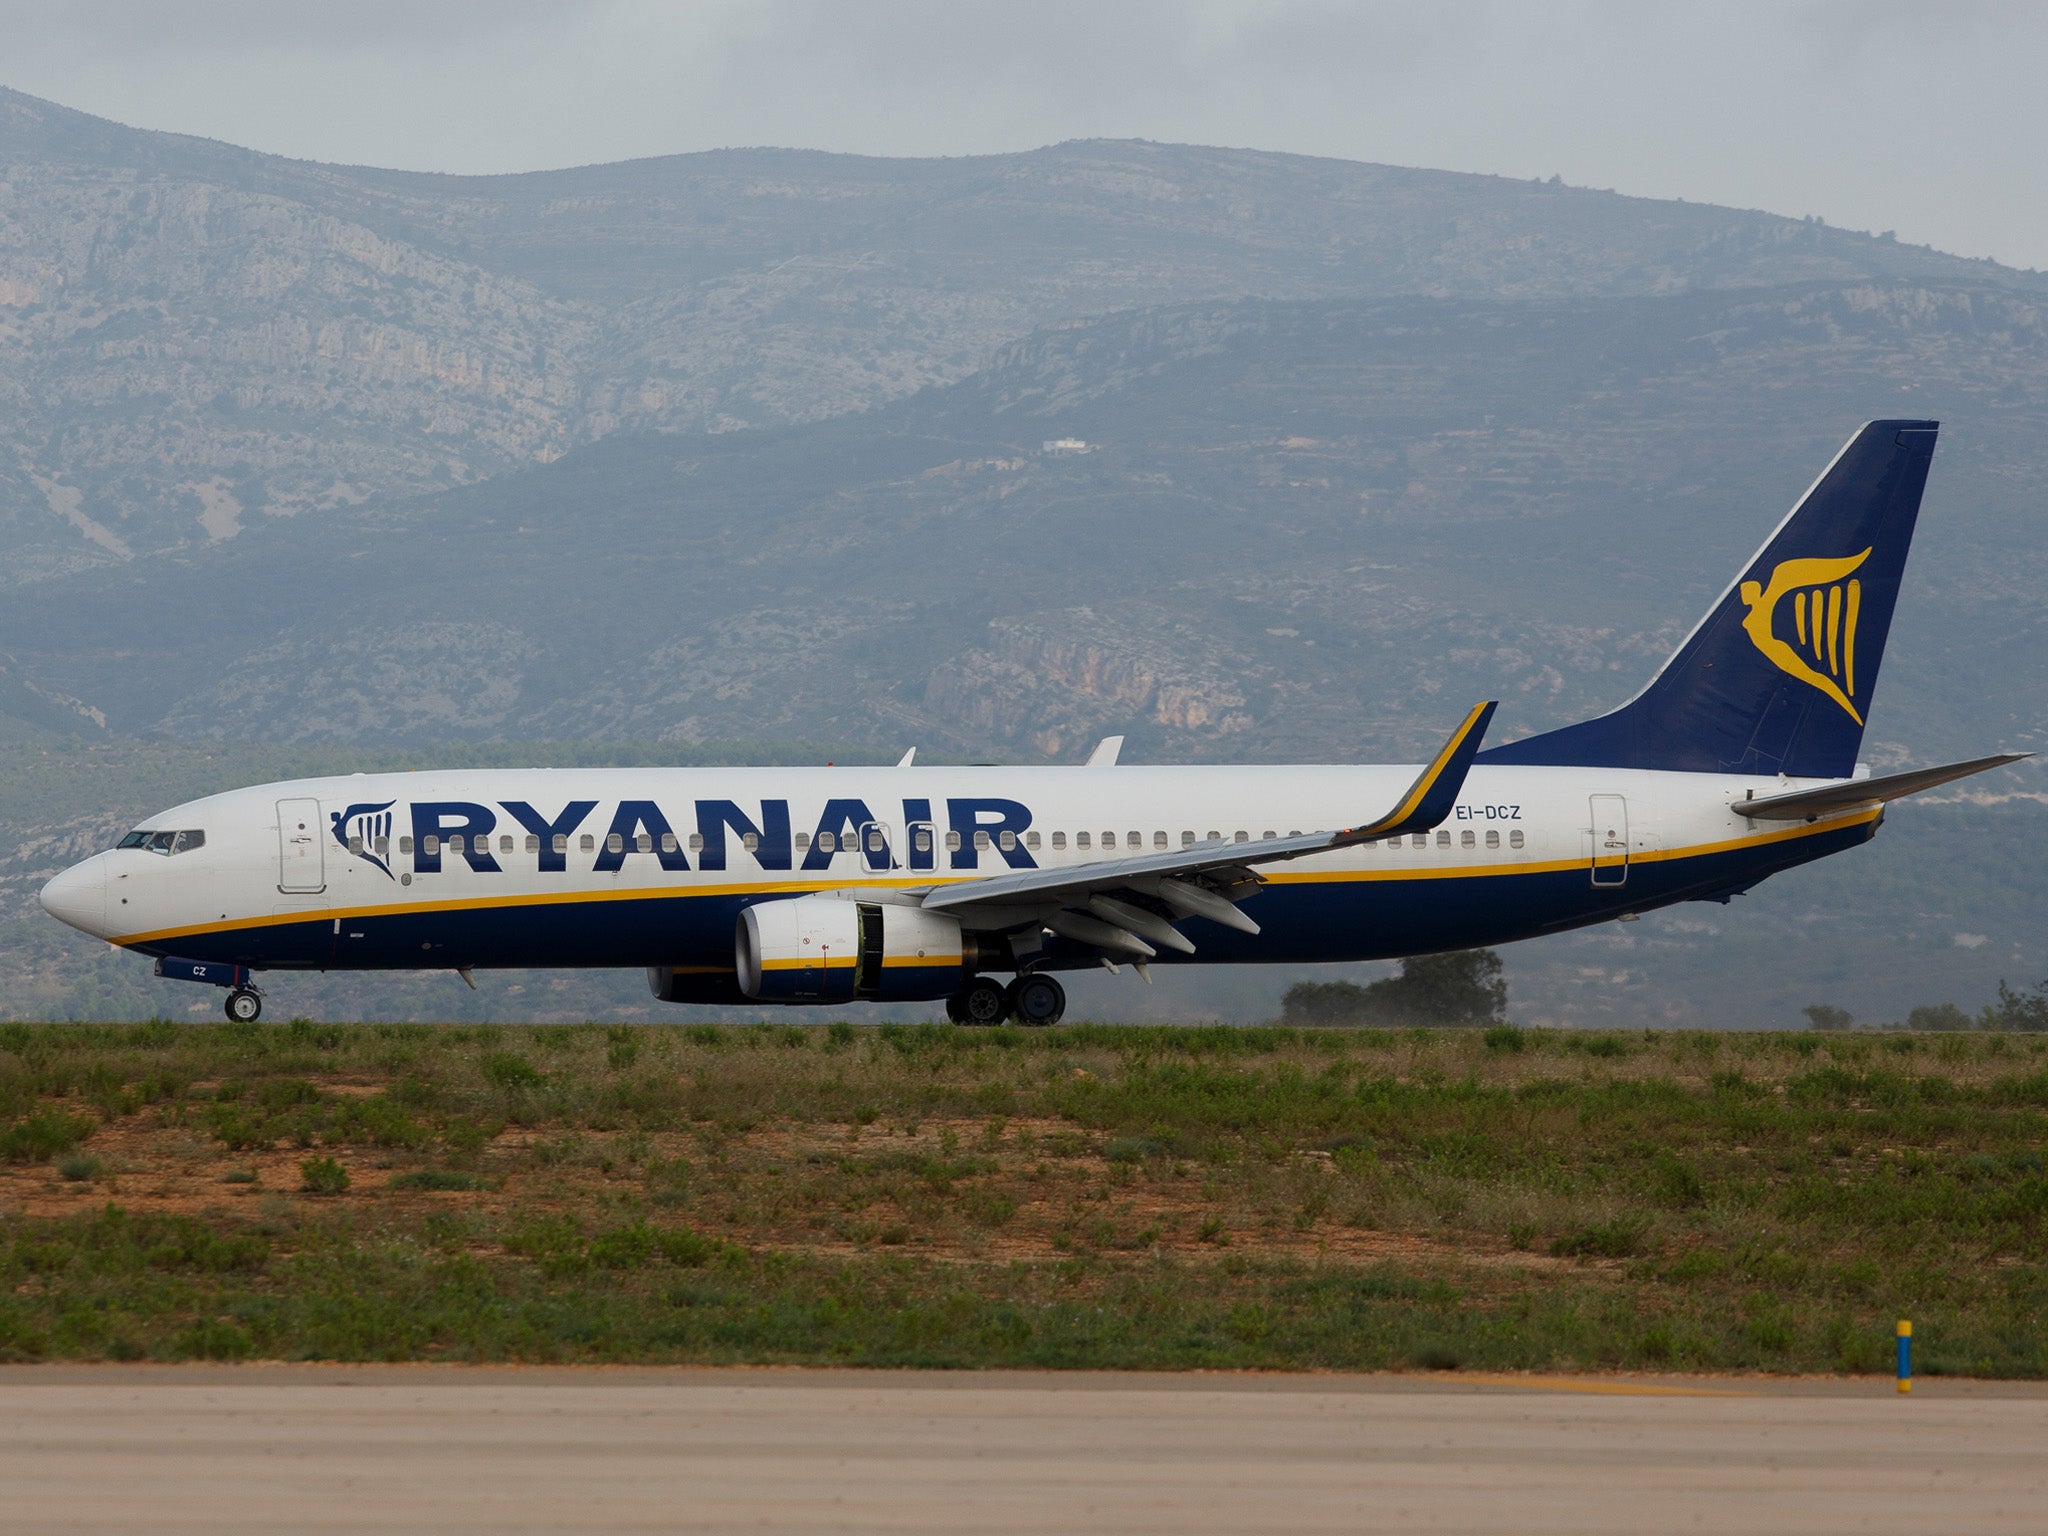 Cash machine? Ryanair wants to change the claims culture